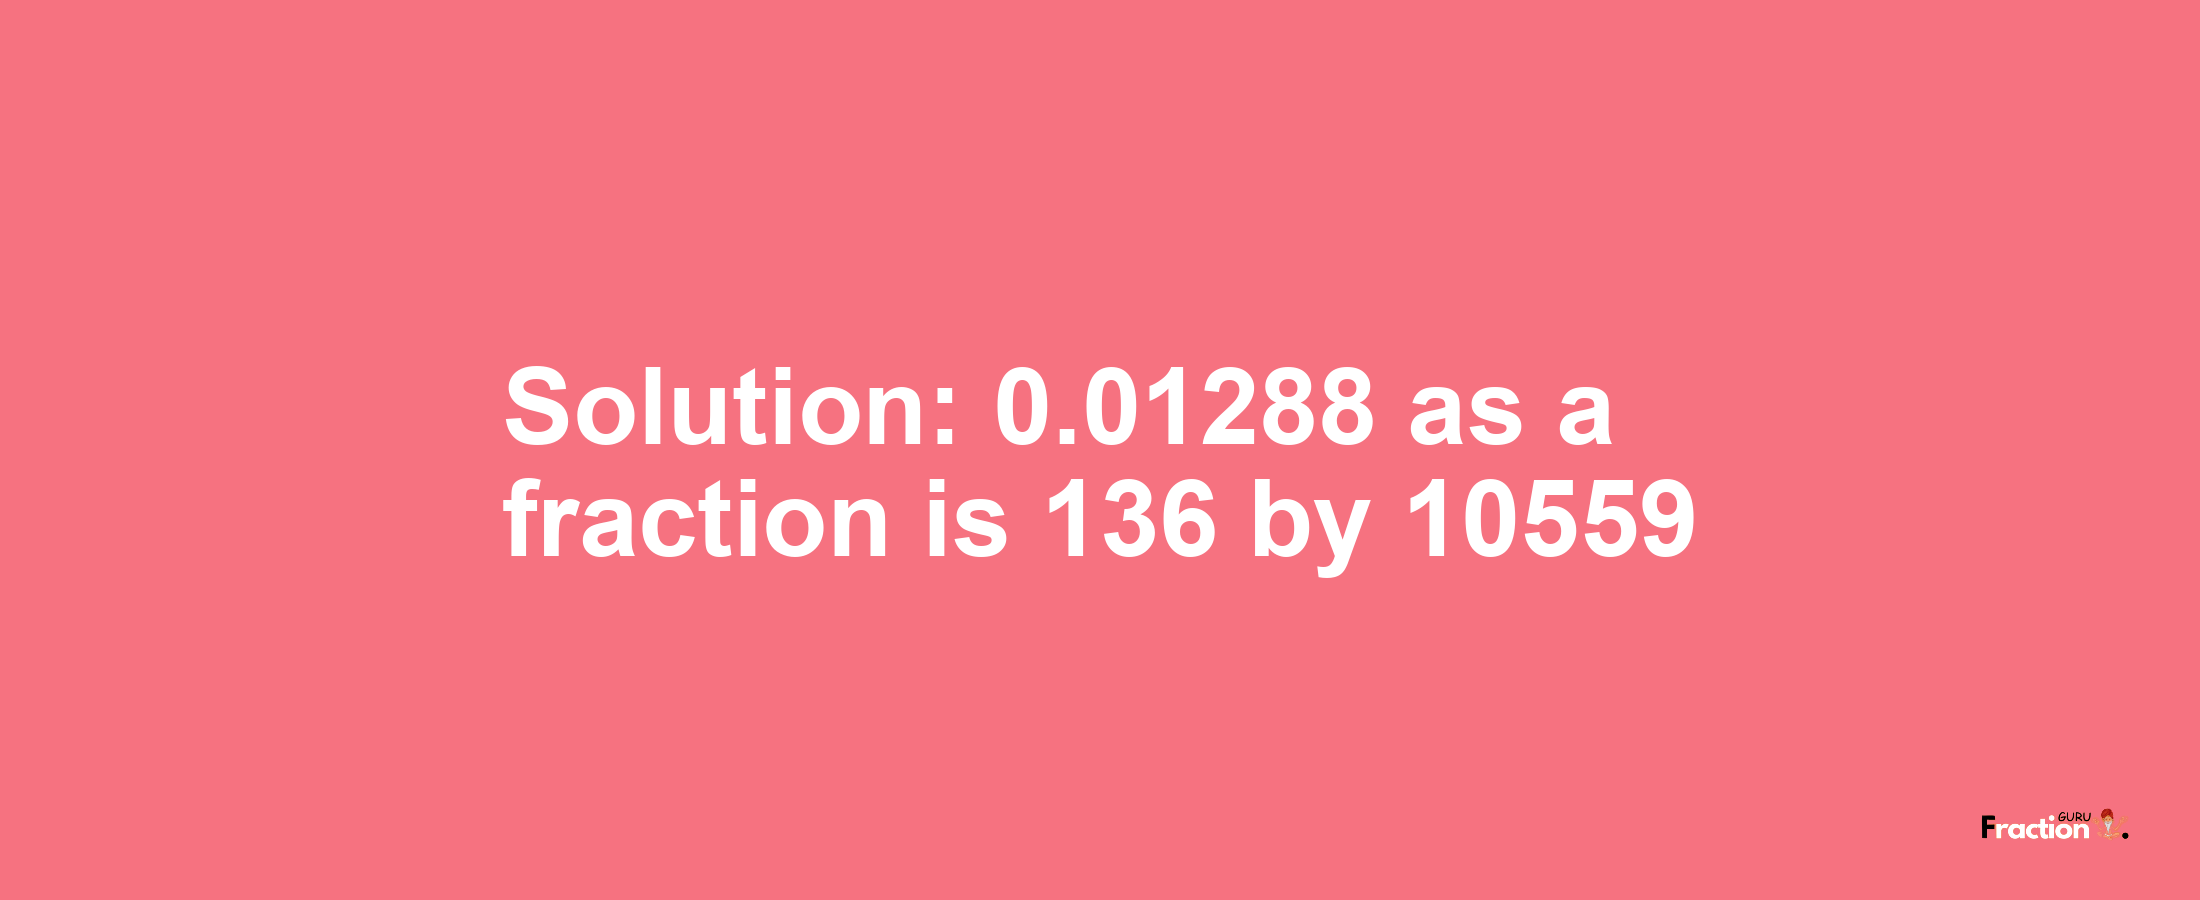 Solution:0.01288 as a fraction is 136/10559